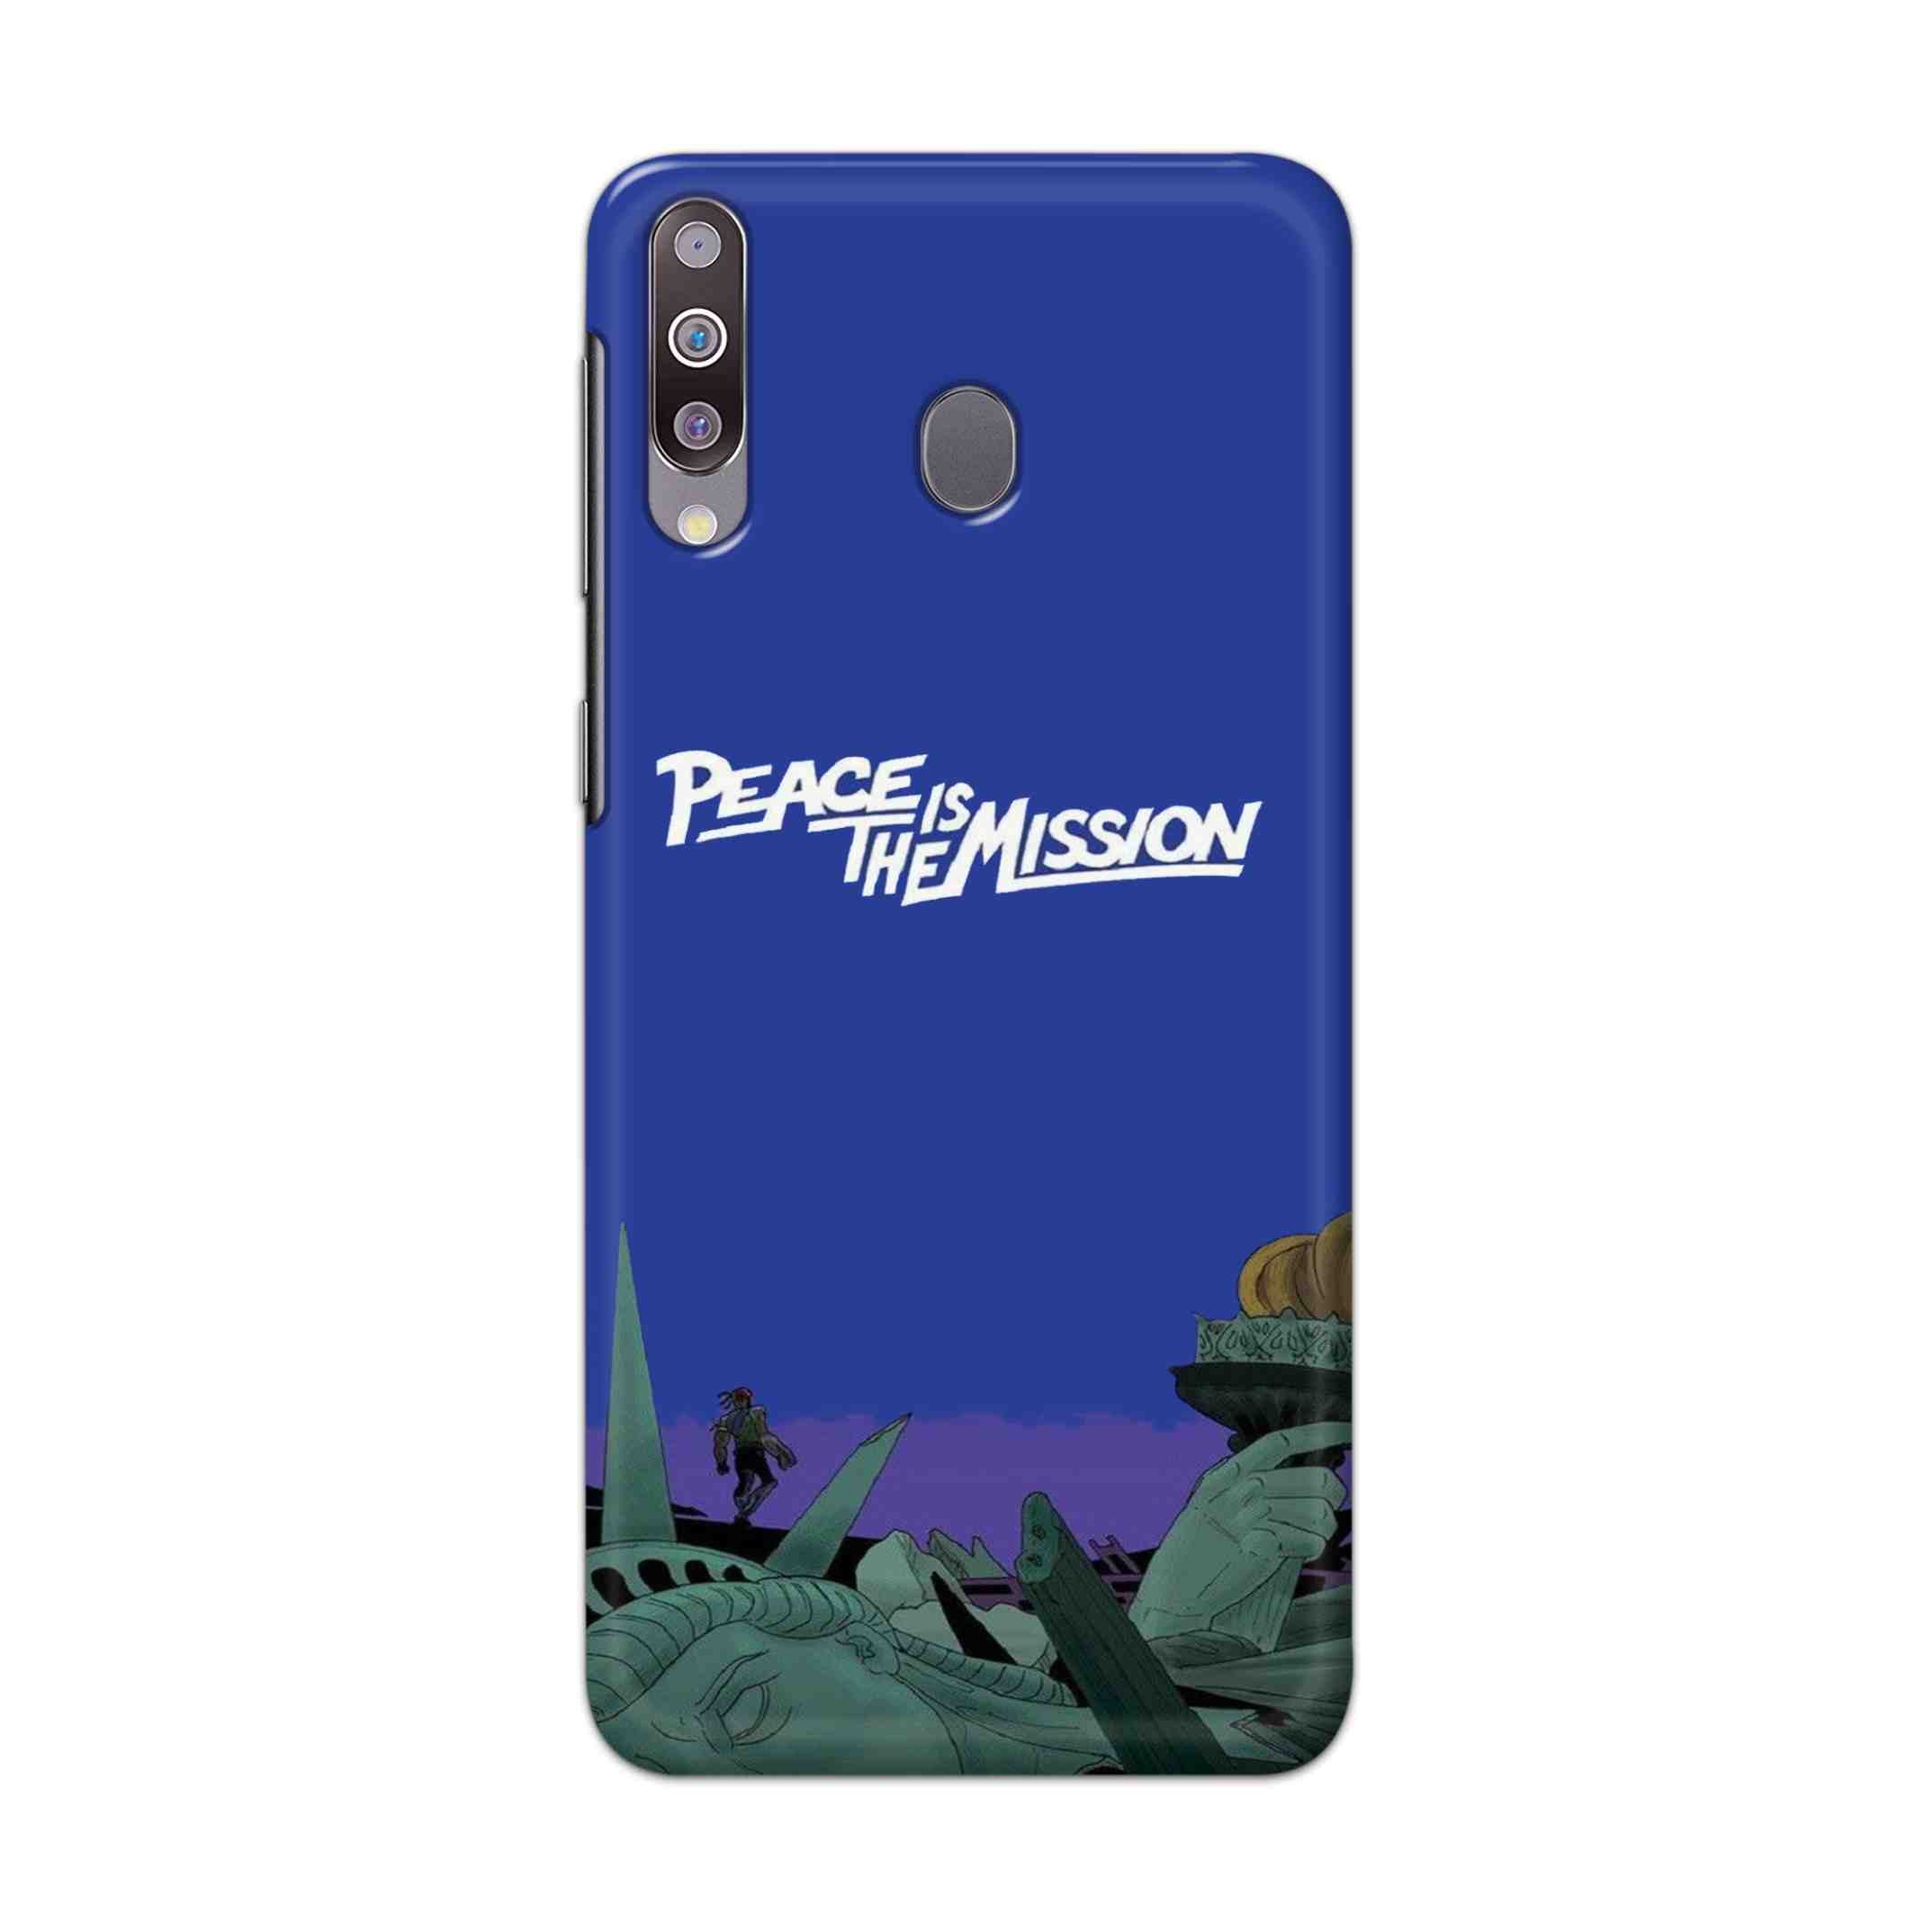 Buy Peace Is The Misson Hard Back Mobile Phone Case Cover For Samsung Galaxy M30 Online